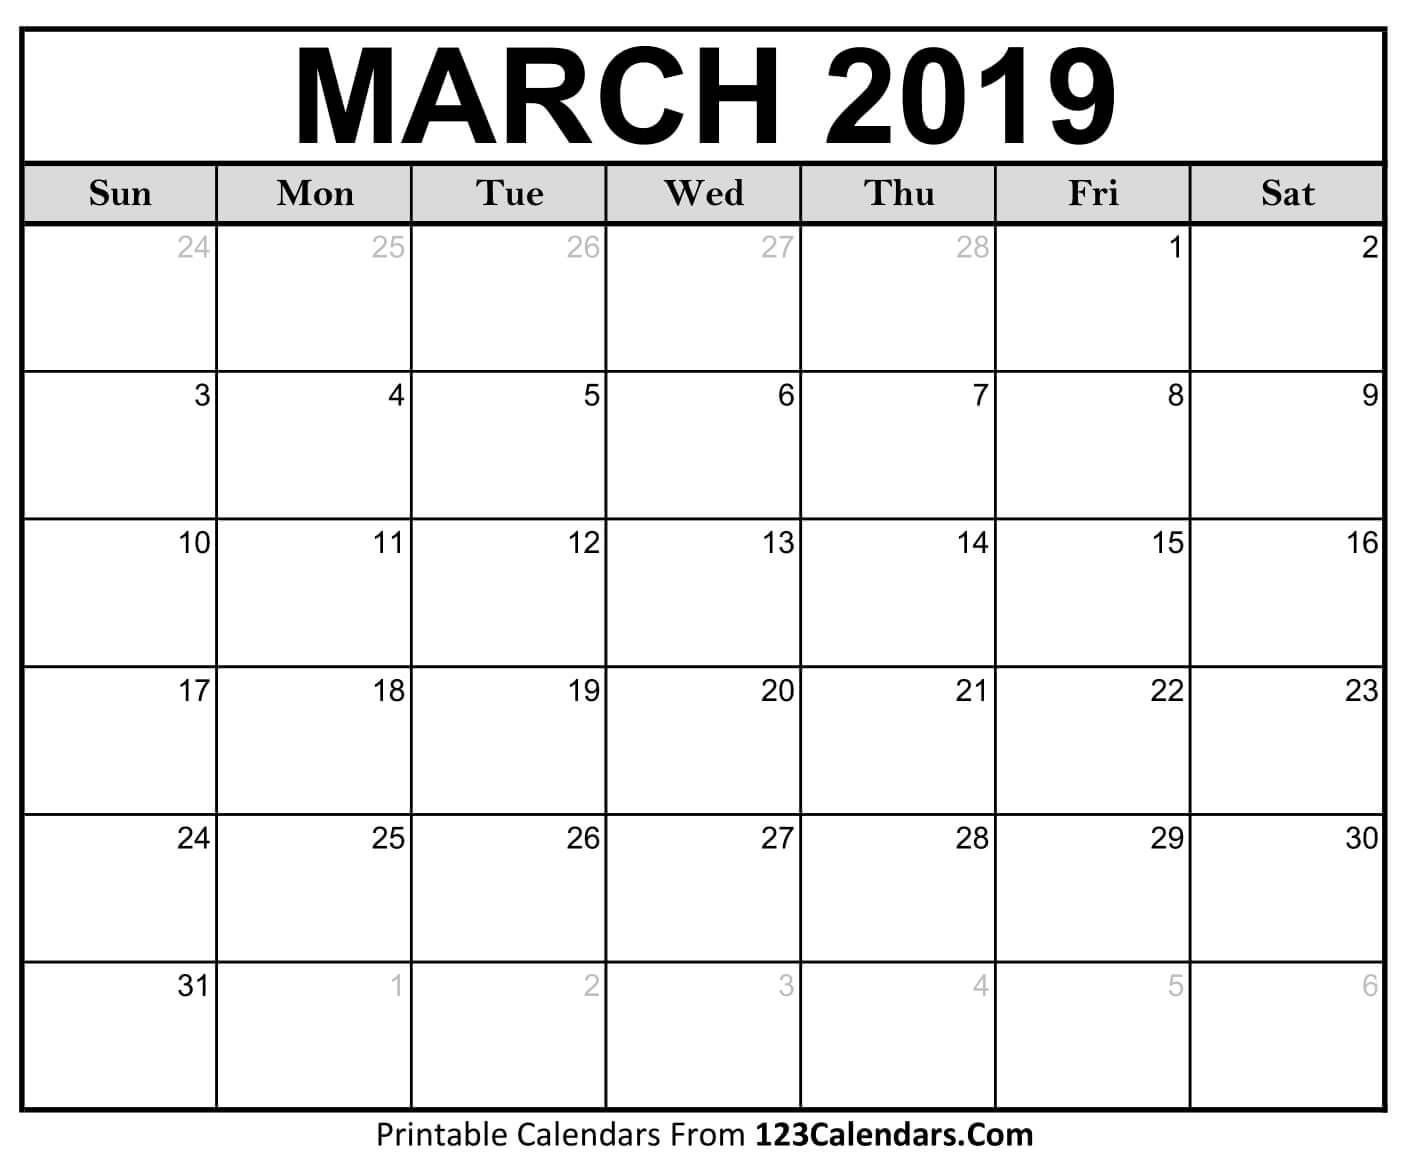 March 2019 Printable Calendar. Add Your Notes Quickly And